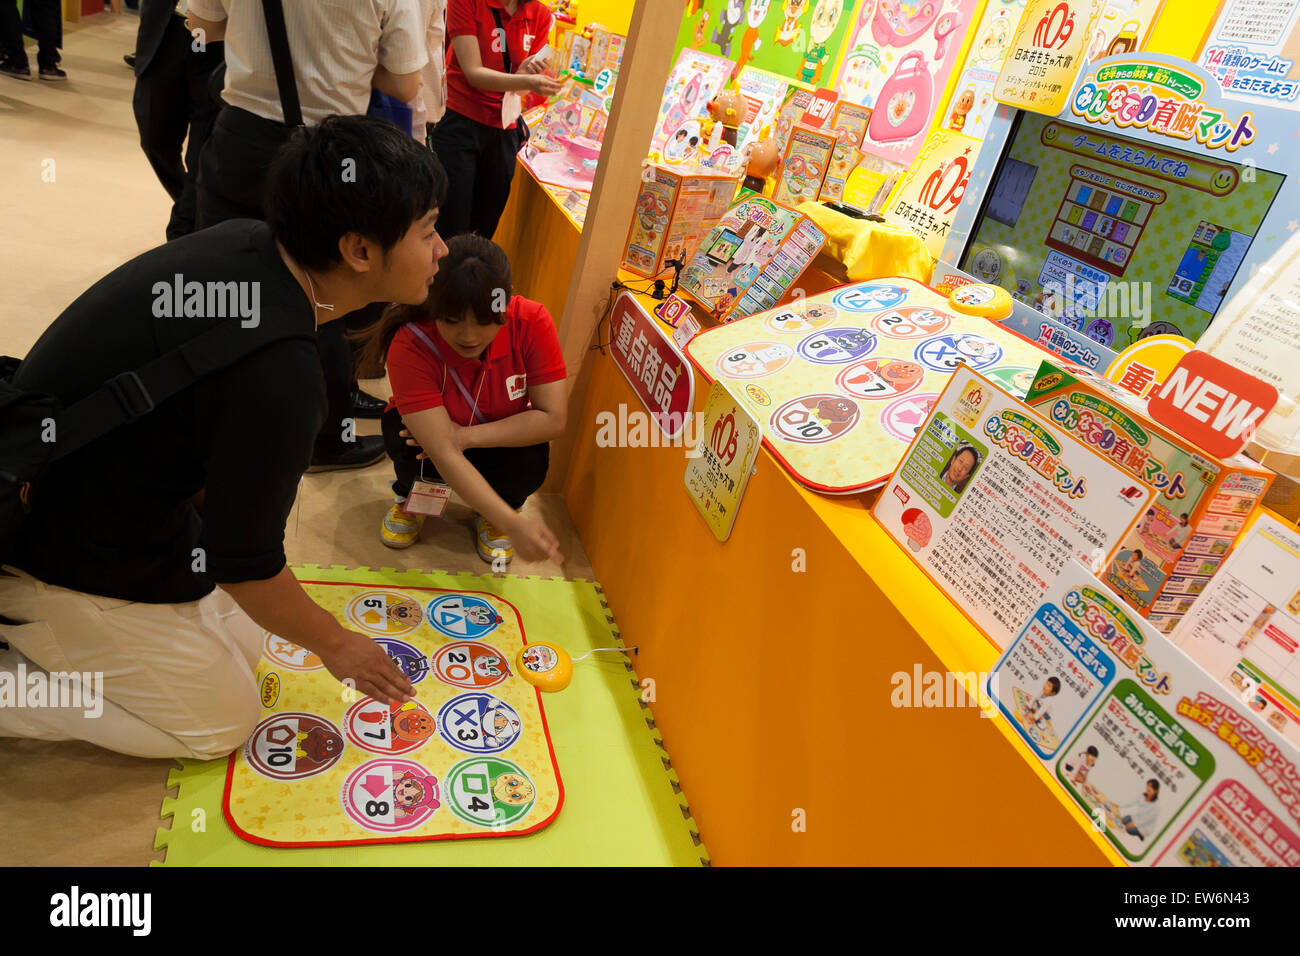 A man tries the products of JoyPalette Co., LTD. during the International Tokyo Toy Show 2015 in Tokyo Big Sight on June 18, 2015, Tokyo, Japan. Japan's largest trade show for toy makers attracts buyers and collectors by introducing the latest products from different toymakers from Japan and overseas. The toy fair showcases about 35,000 toys from 149 domestic and foreign companies and is held over four days. © Rodrigo Reyes Marin/AFLO/Alamy Live News Stock Photo